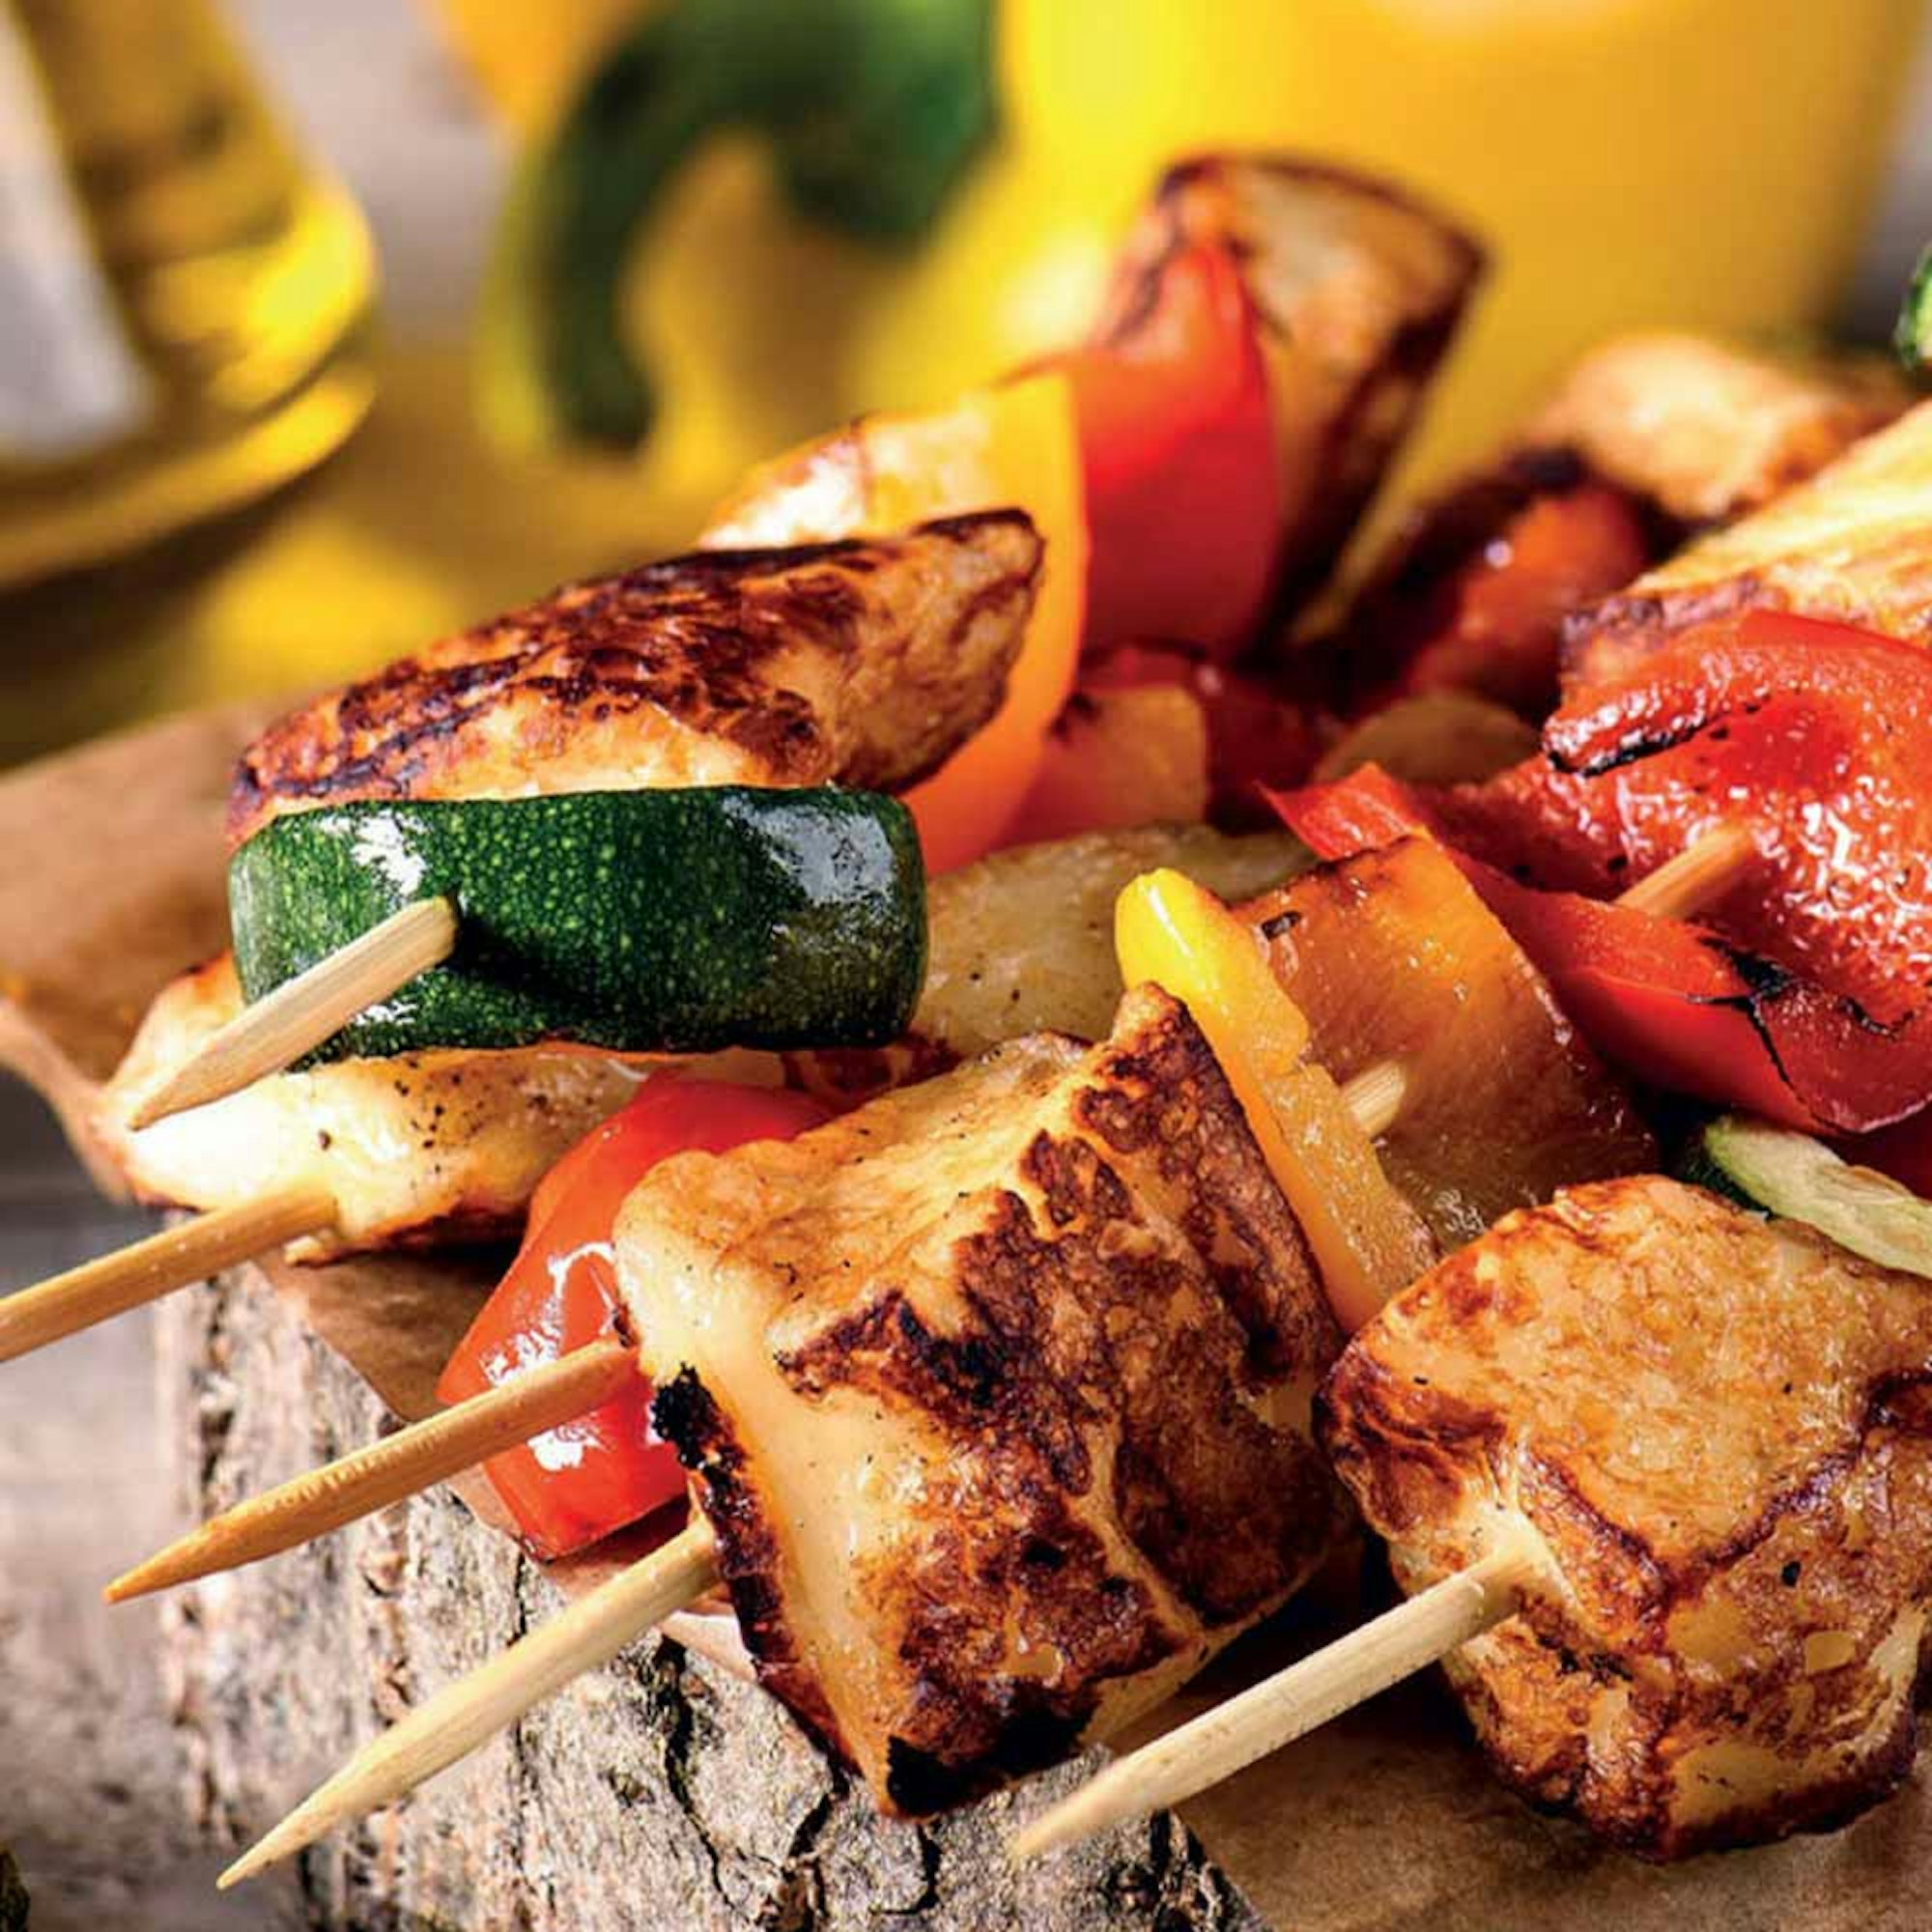 Grill Haloumi and Mediterranean Vegetable Skewers recipe | Robins Kitchen blog